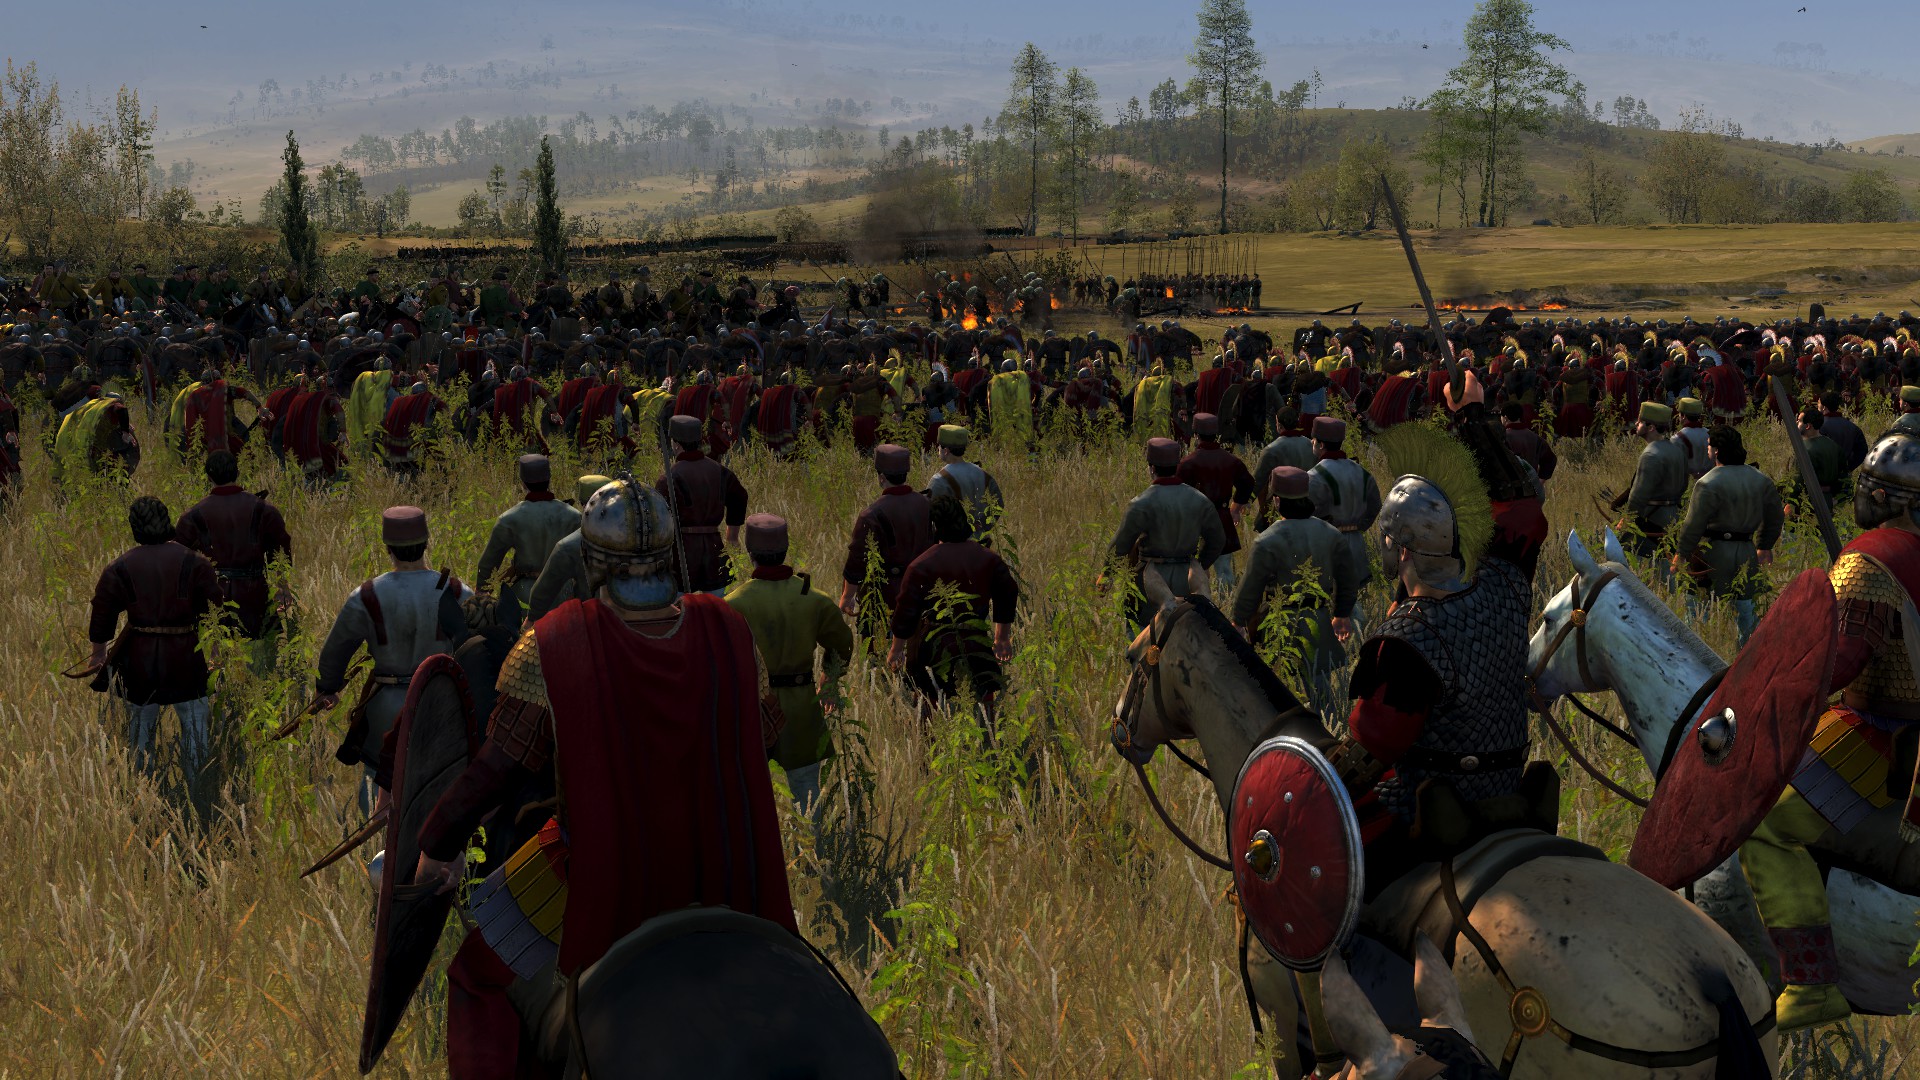 agrez all in one mod for total war attila, image 17, image, screenshots, sc...